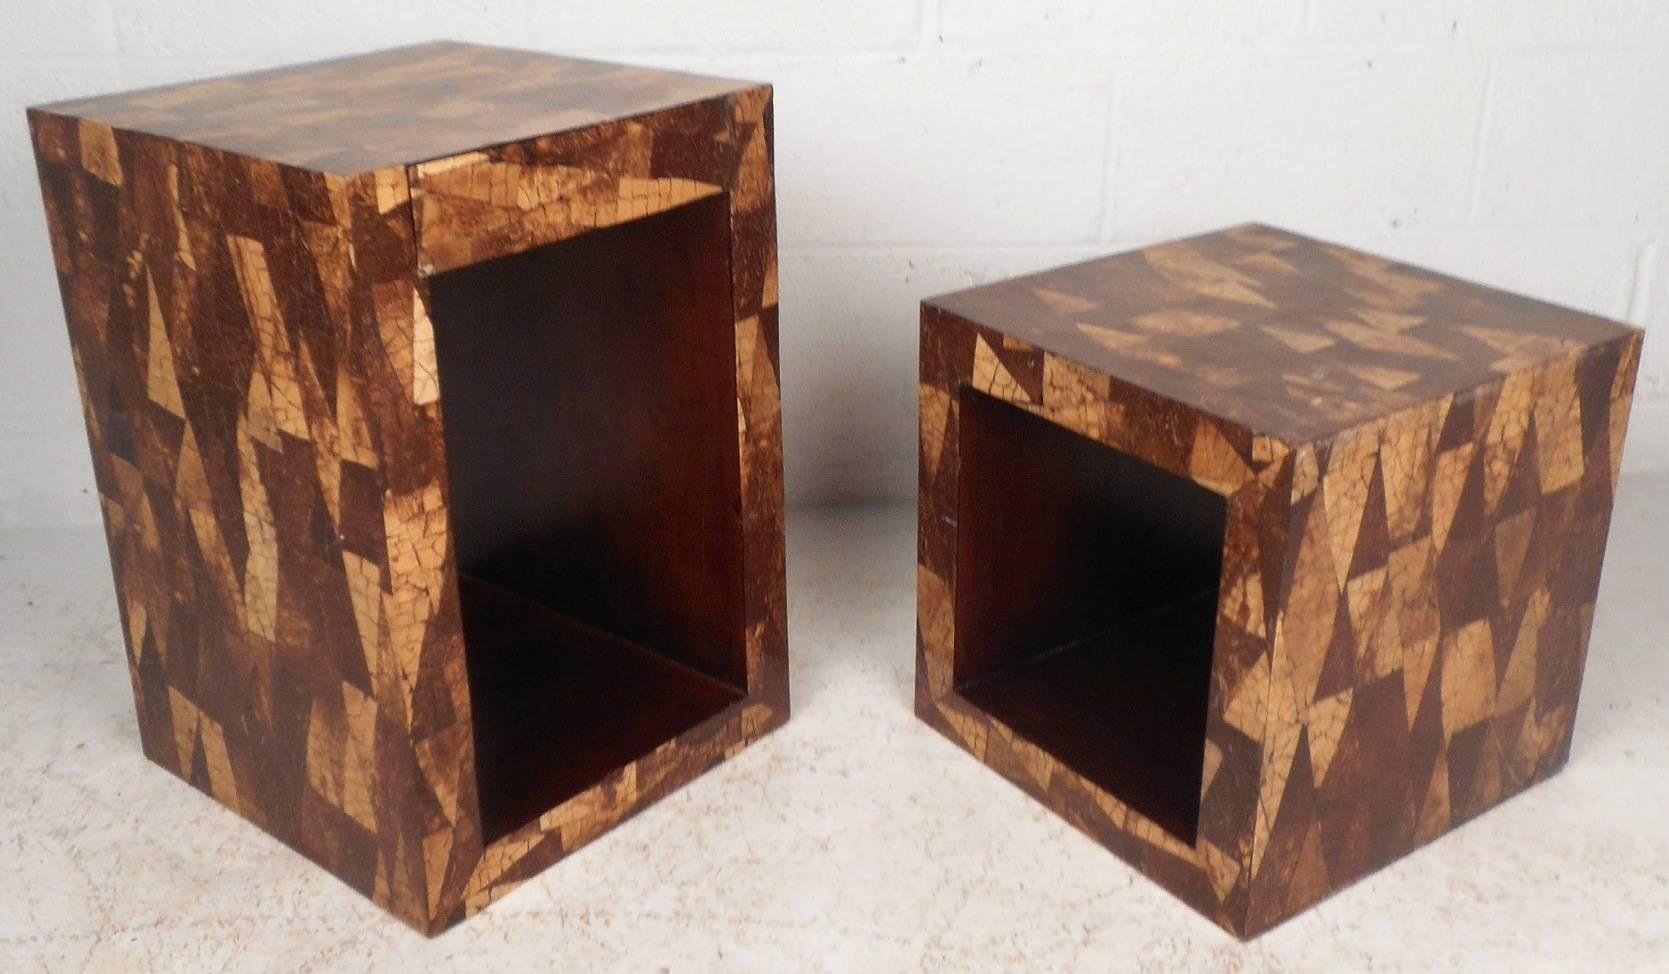 This beautiful vintage modern pair of end tables feature a unique coconut shell inlay design around the exterior. The interior allows room for storage and has gorgeous wood grain to compliment the outside. The larger table has one hidden drawer